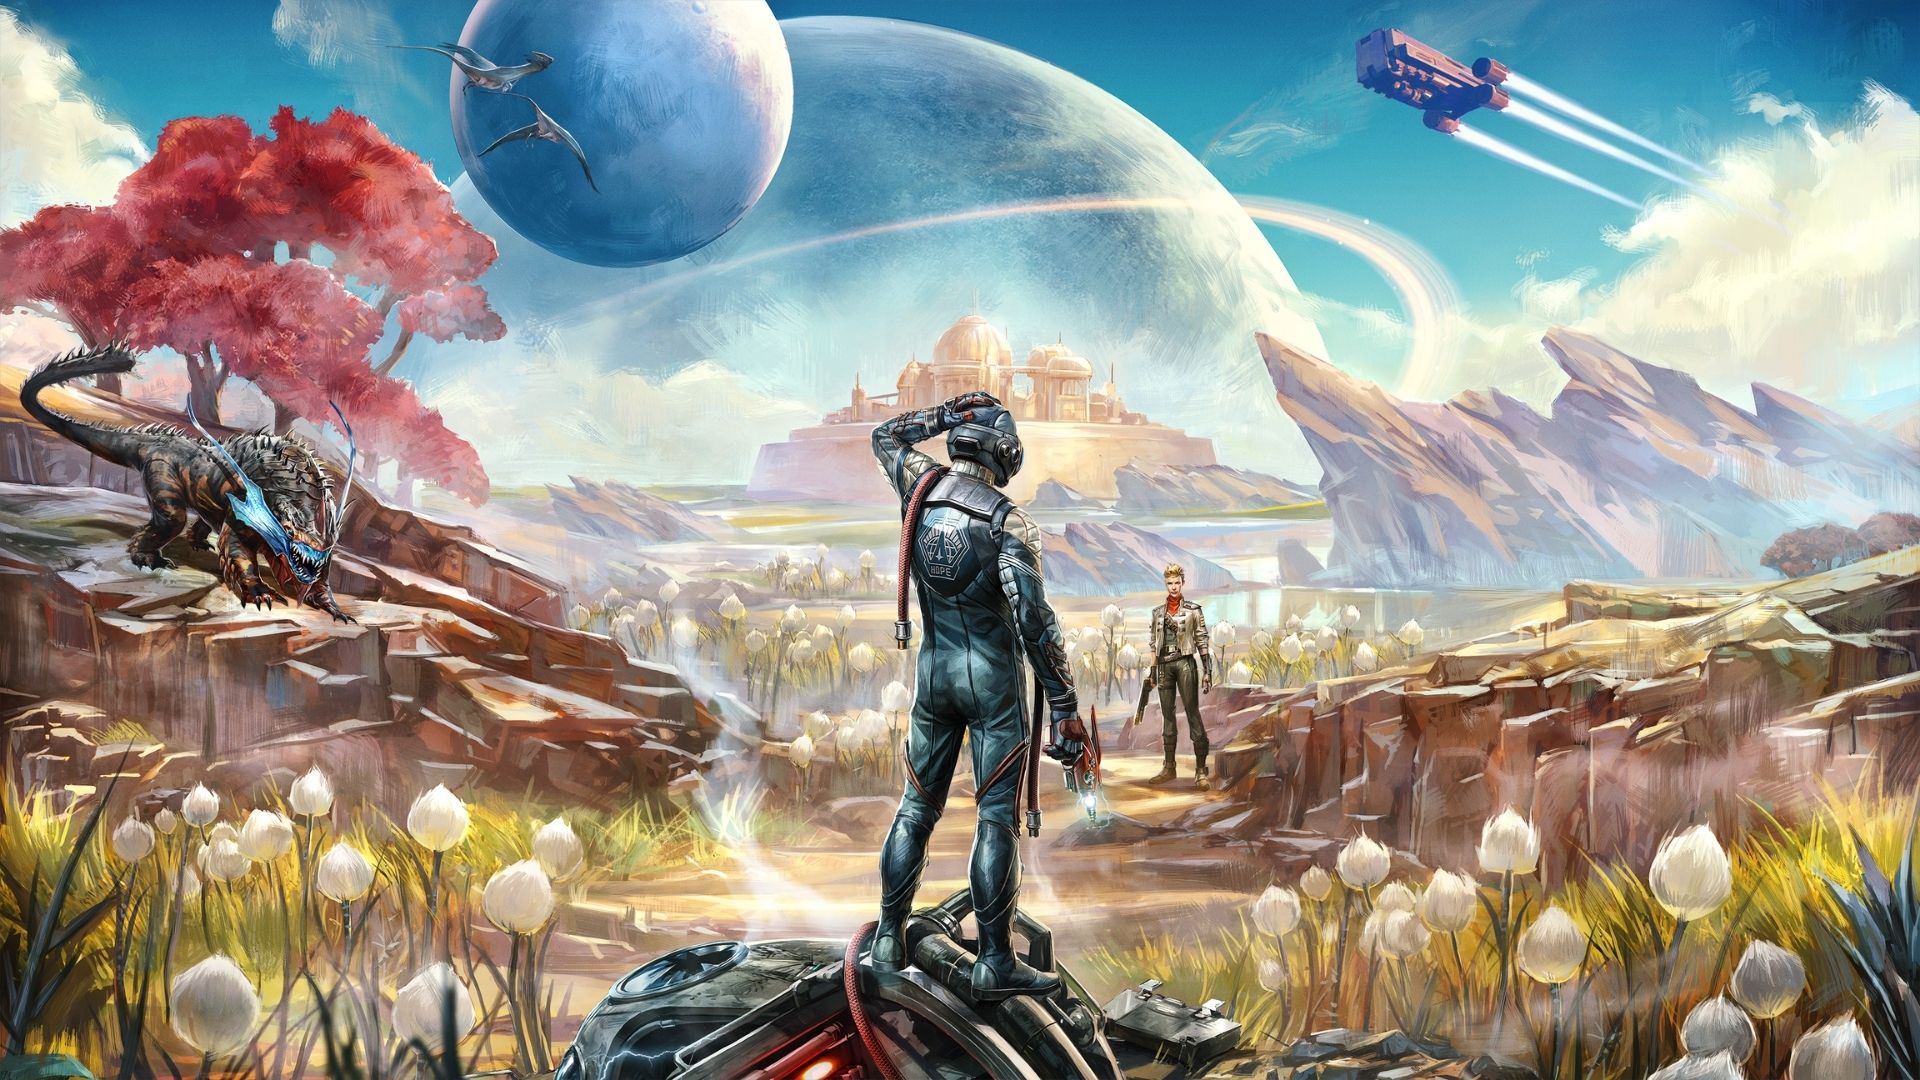 Art from a game like Skyrim, showing a man looking over a wide scene full of fantastical plants, with massive planets in the skyline.